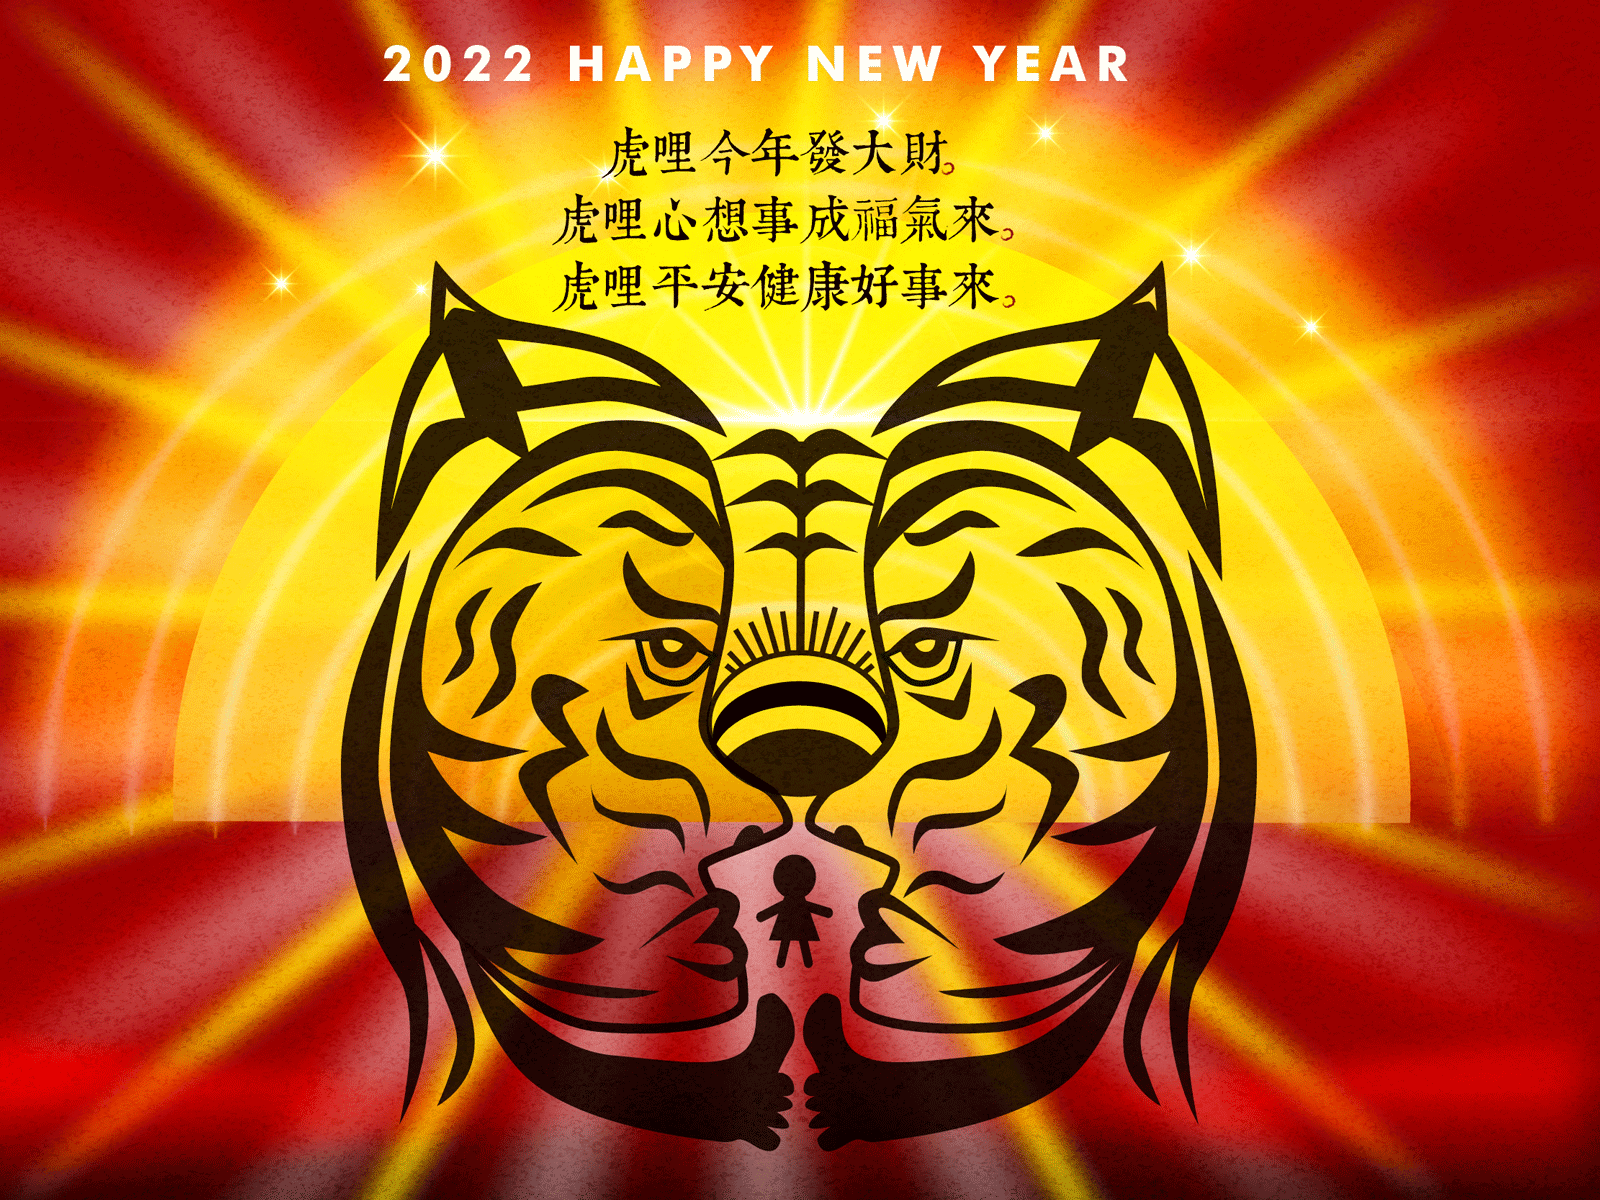 Happy Chinese New Year 2022 2022 gif happy new year illustration year of the tiger